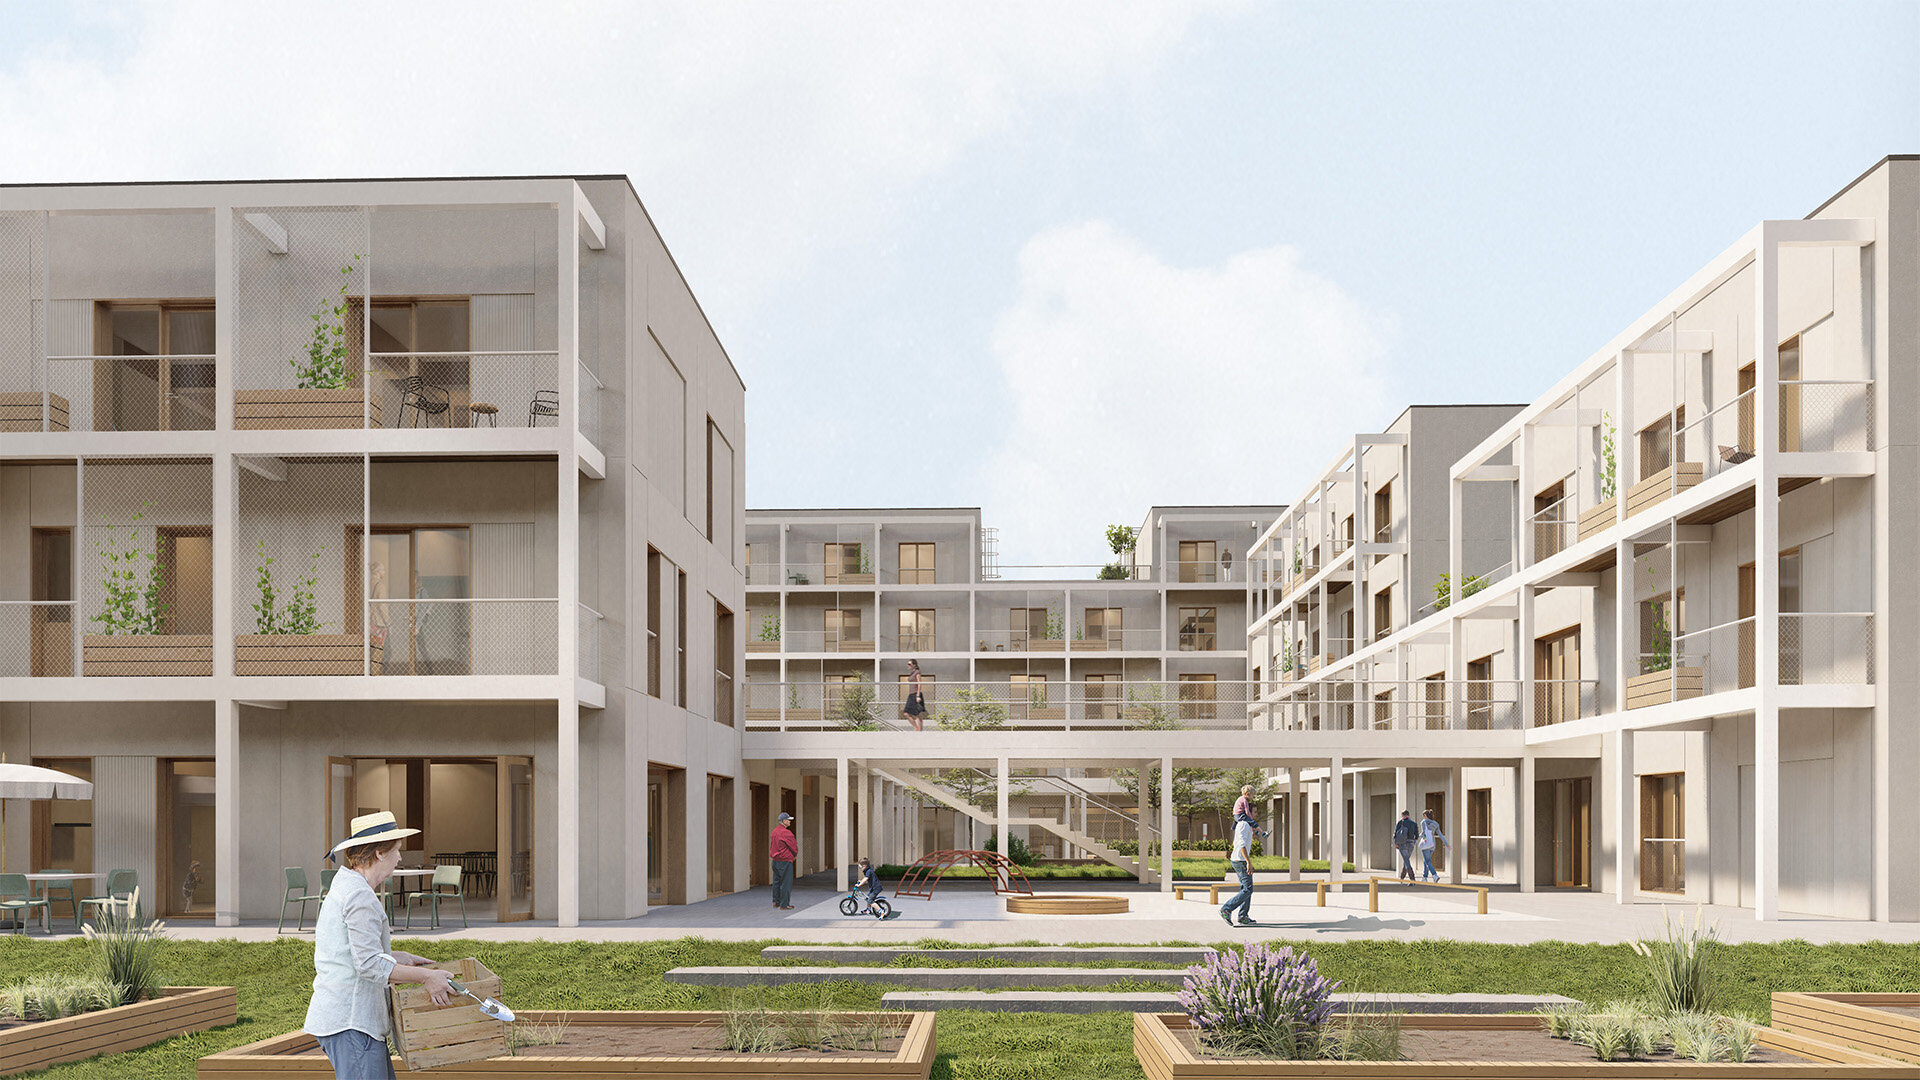 Social housing complex and Urban regeneration in the southern neighborhood